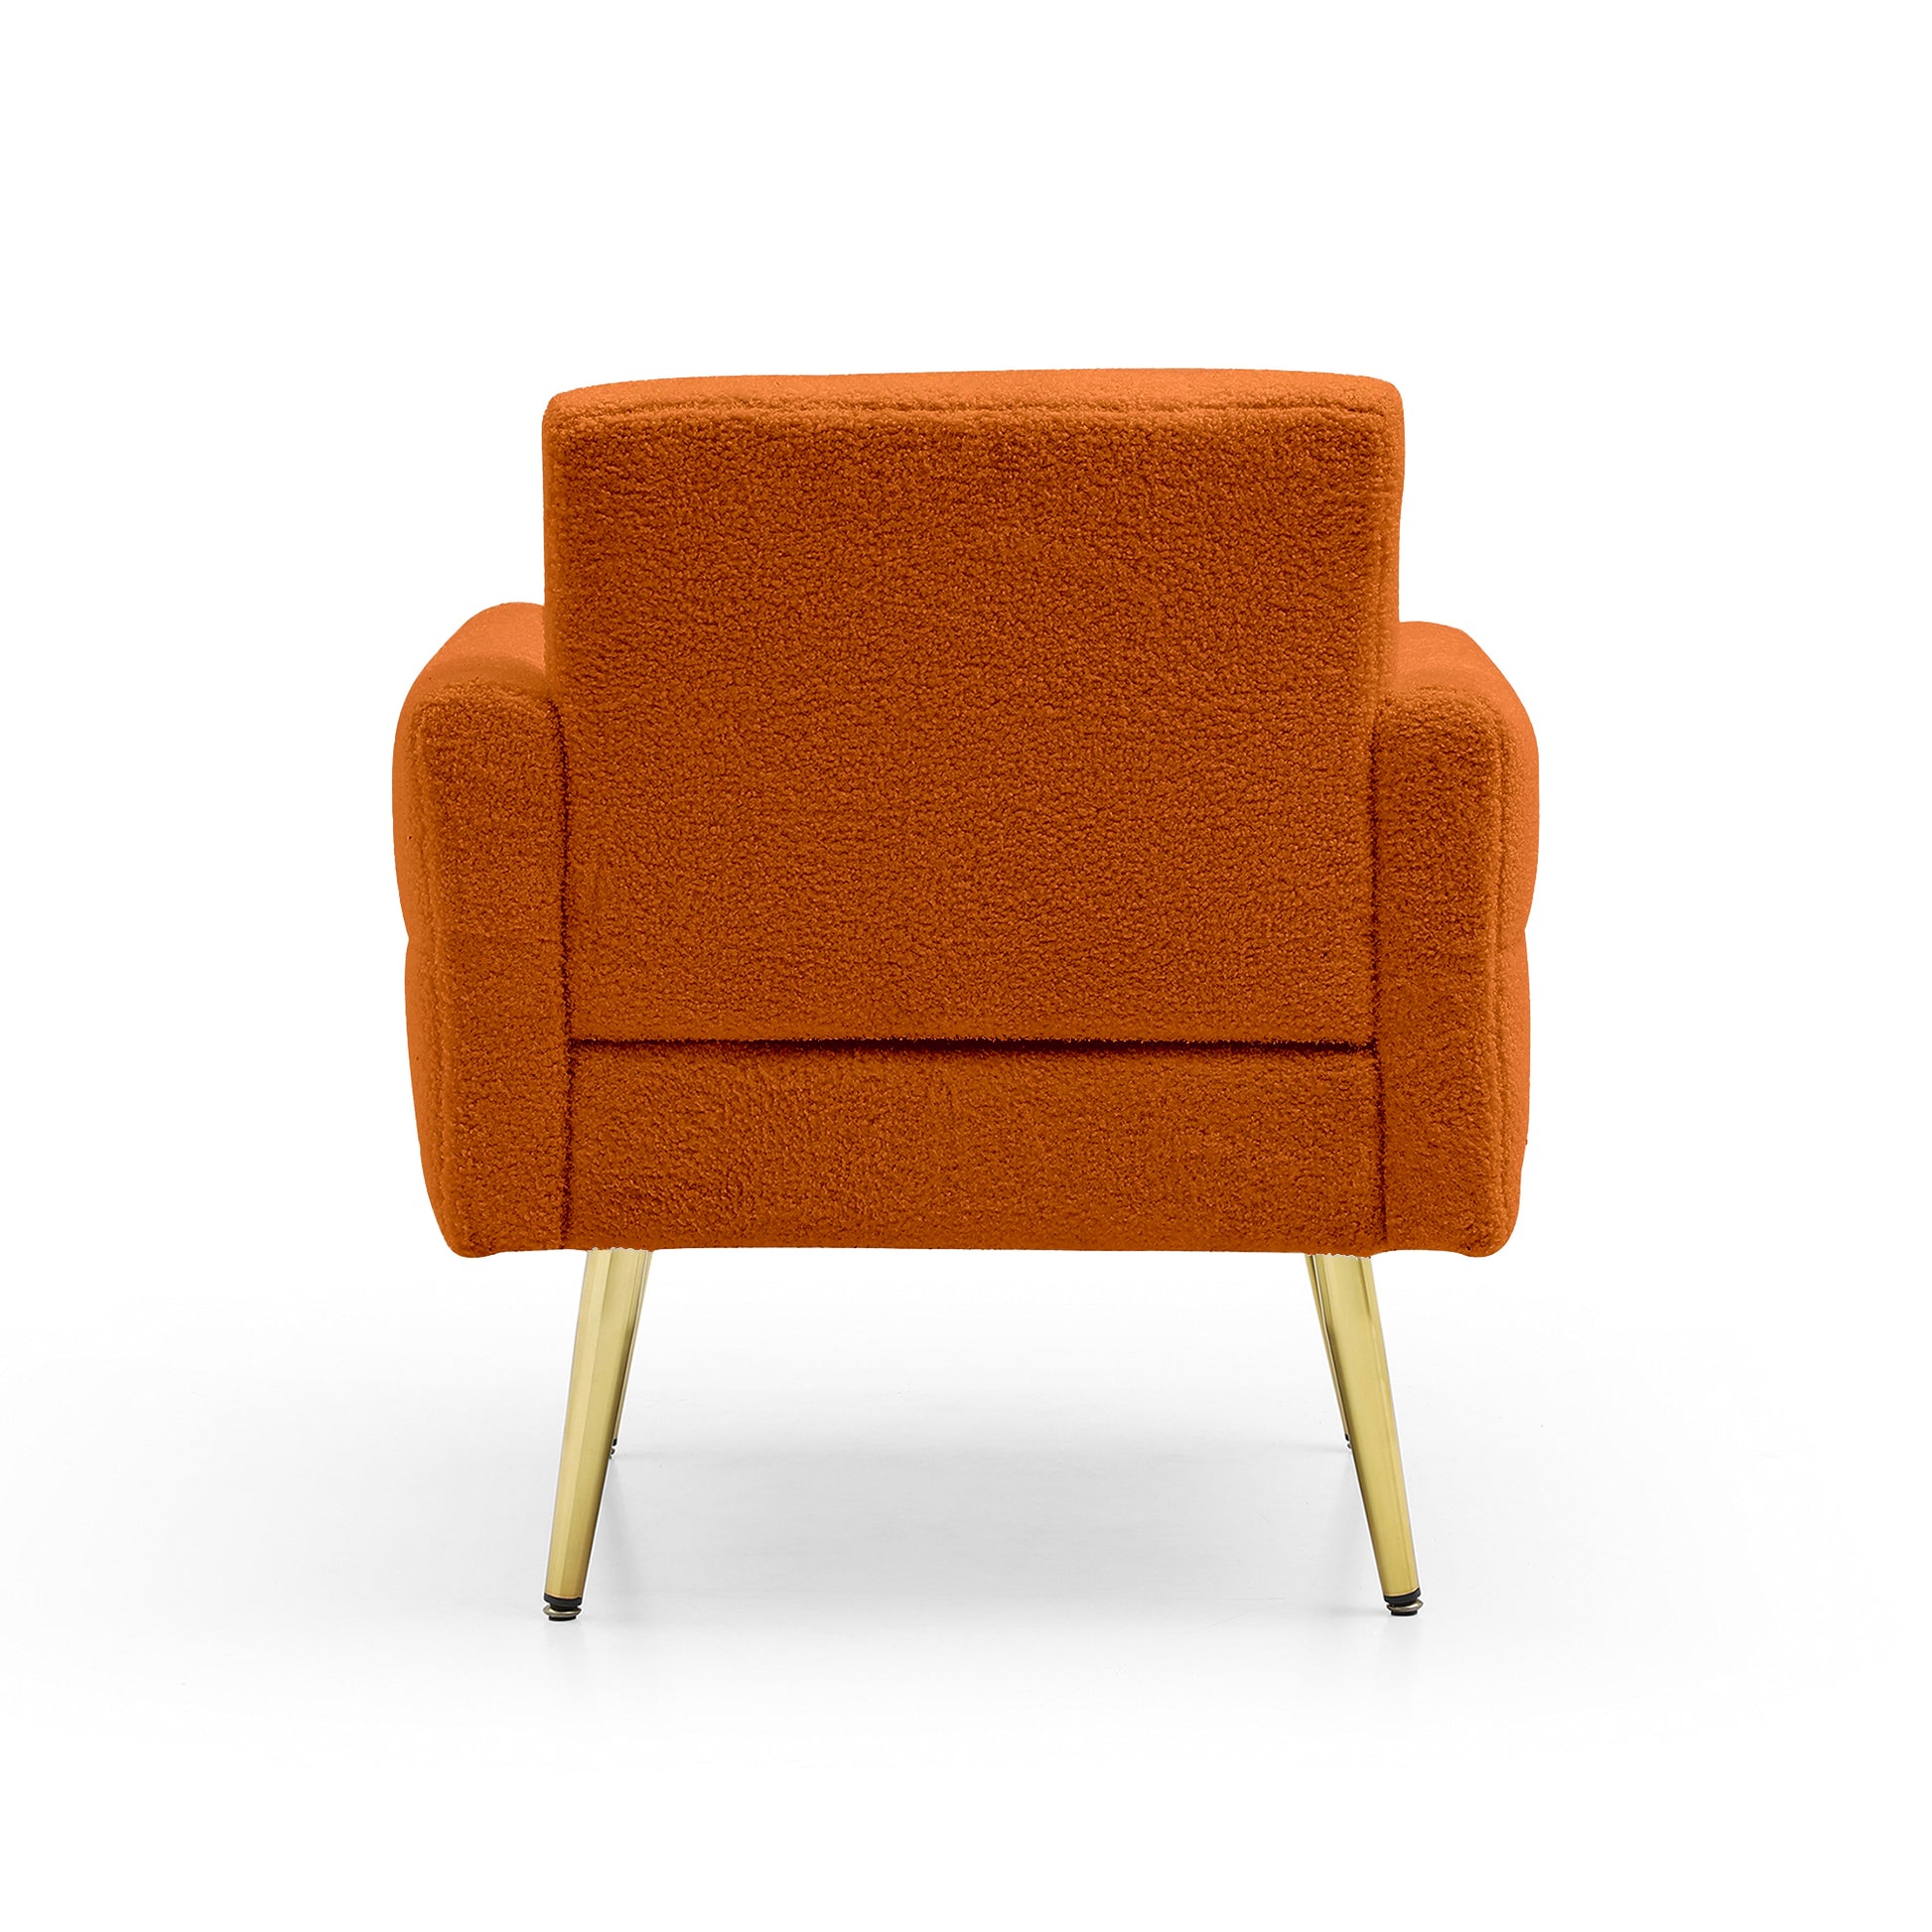 Accent Chair Modern Teddy Comfy Chair with Golden Metal Legs Lounge Chair Living Room Bedroom Reading Armchair , Orange - Enova Luxe Home Store